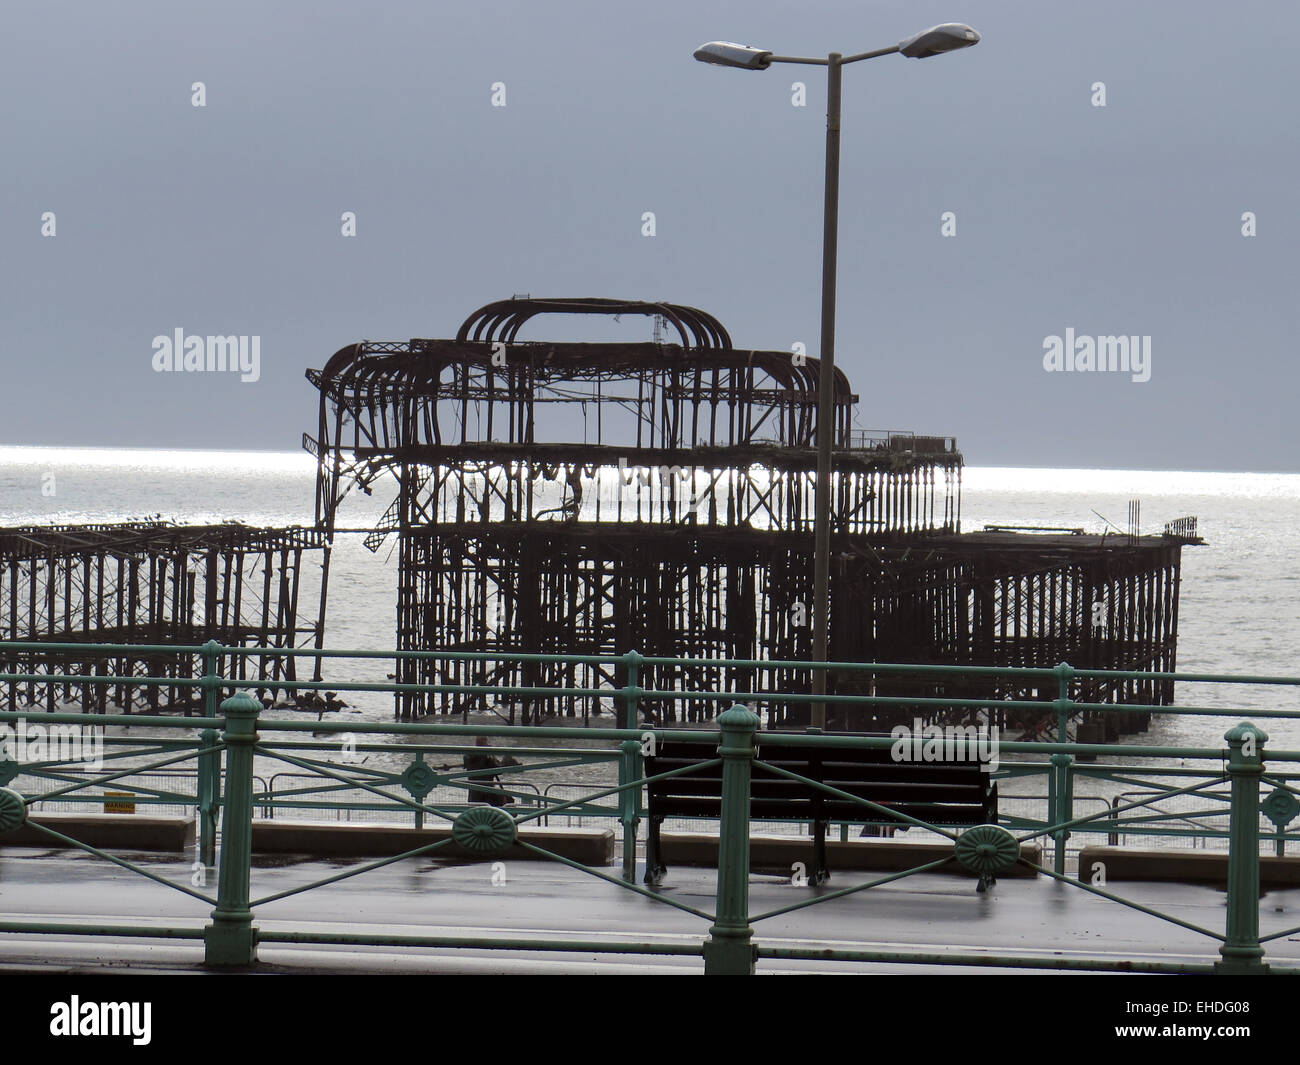 The Arson attacked ruin of the West Pier, Brighton designed by Eugenius Birch, seen across the promenade with decorative railings and benches to a glistening sea. Stock Photo